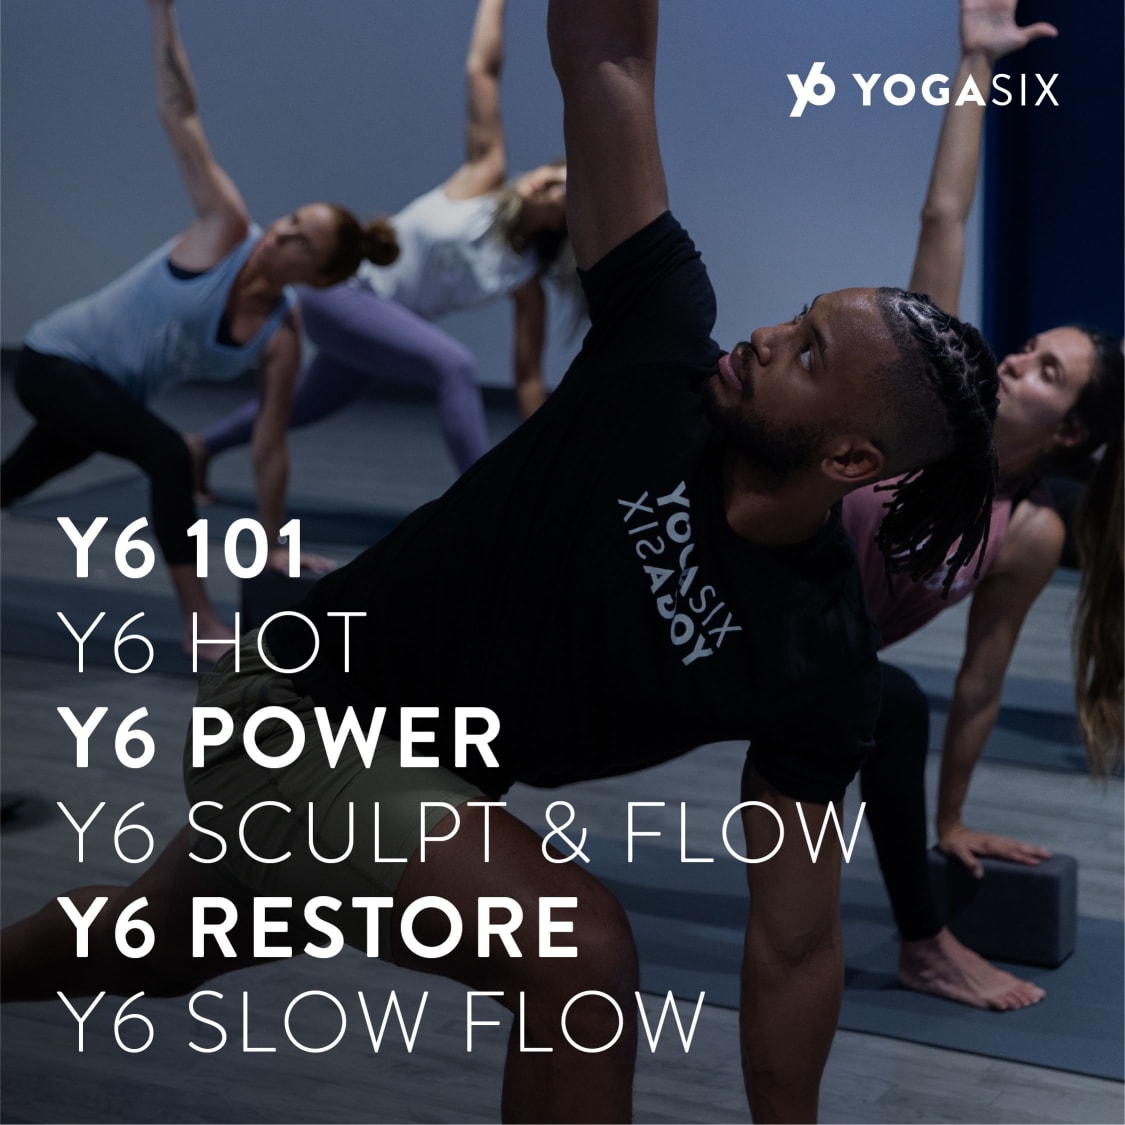 YogaSix - Creve Coeur: Read Reviews and Book Classes on ClassPass